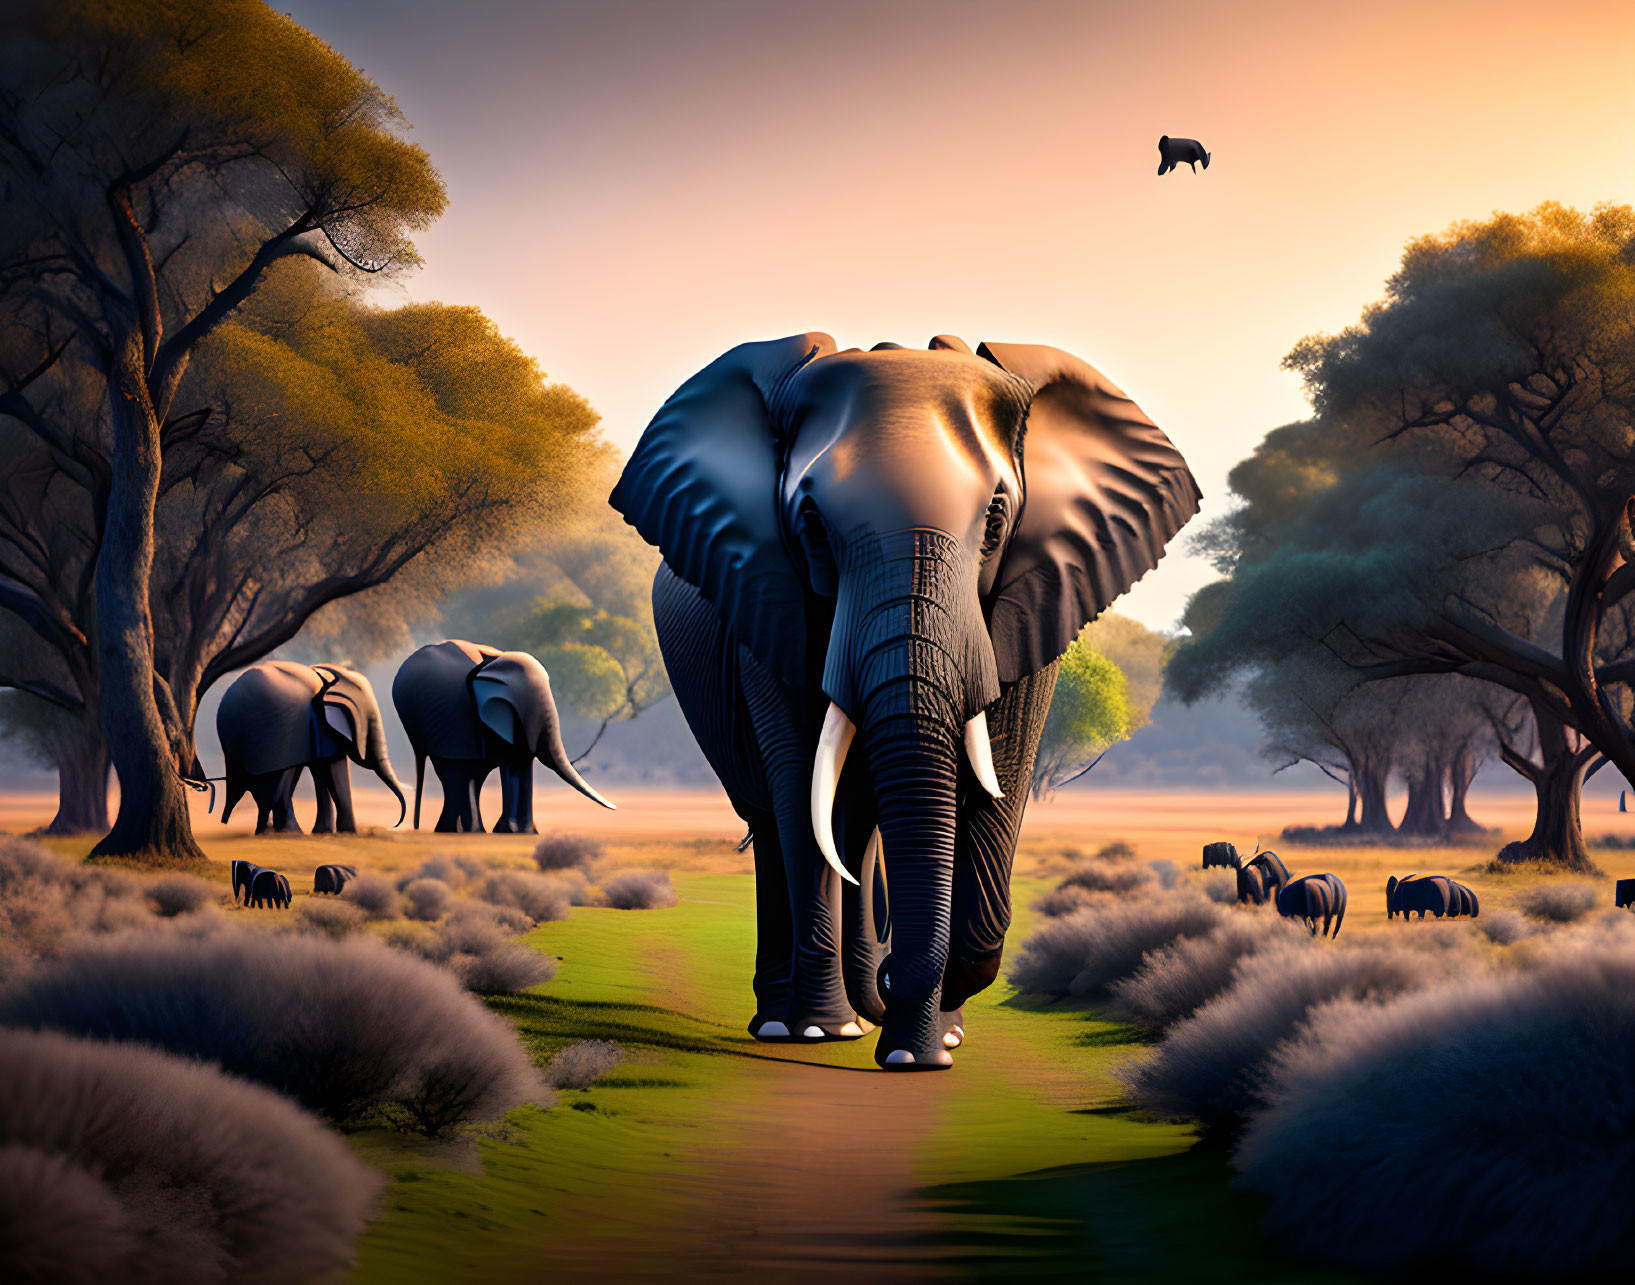 Elephant leading herd in savannah with zebras and bird at sunset